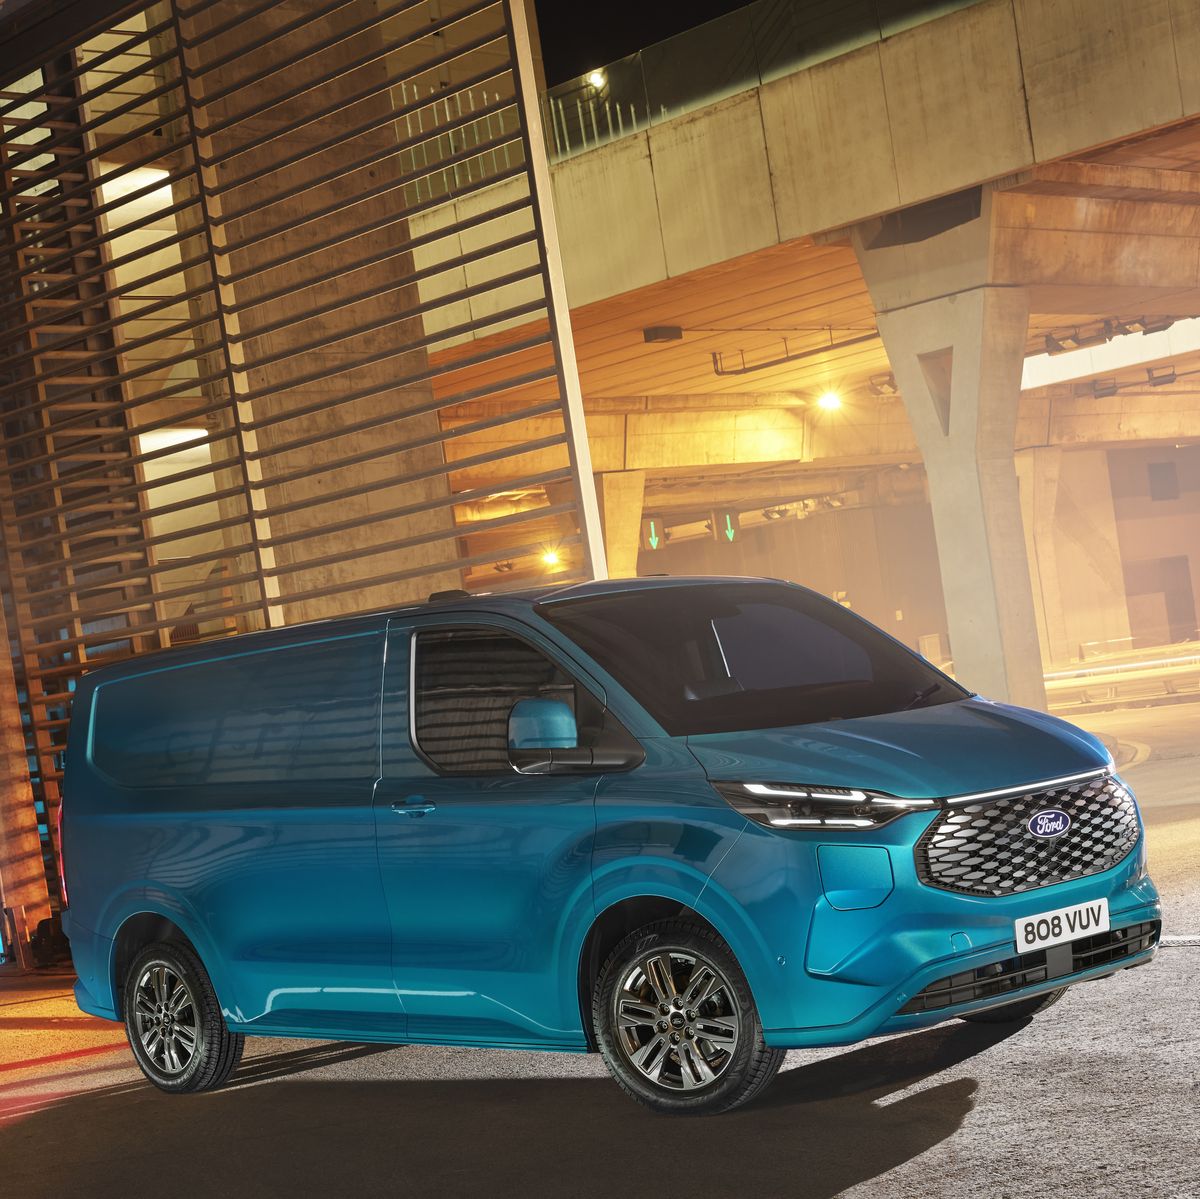 Ford E-Transit Custom Is a New Electric Commercial Van For Europe